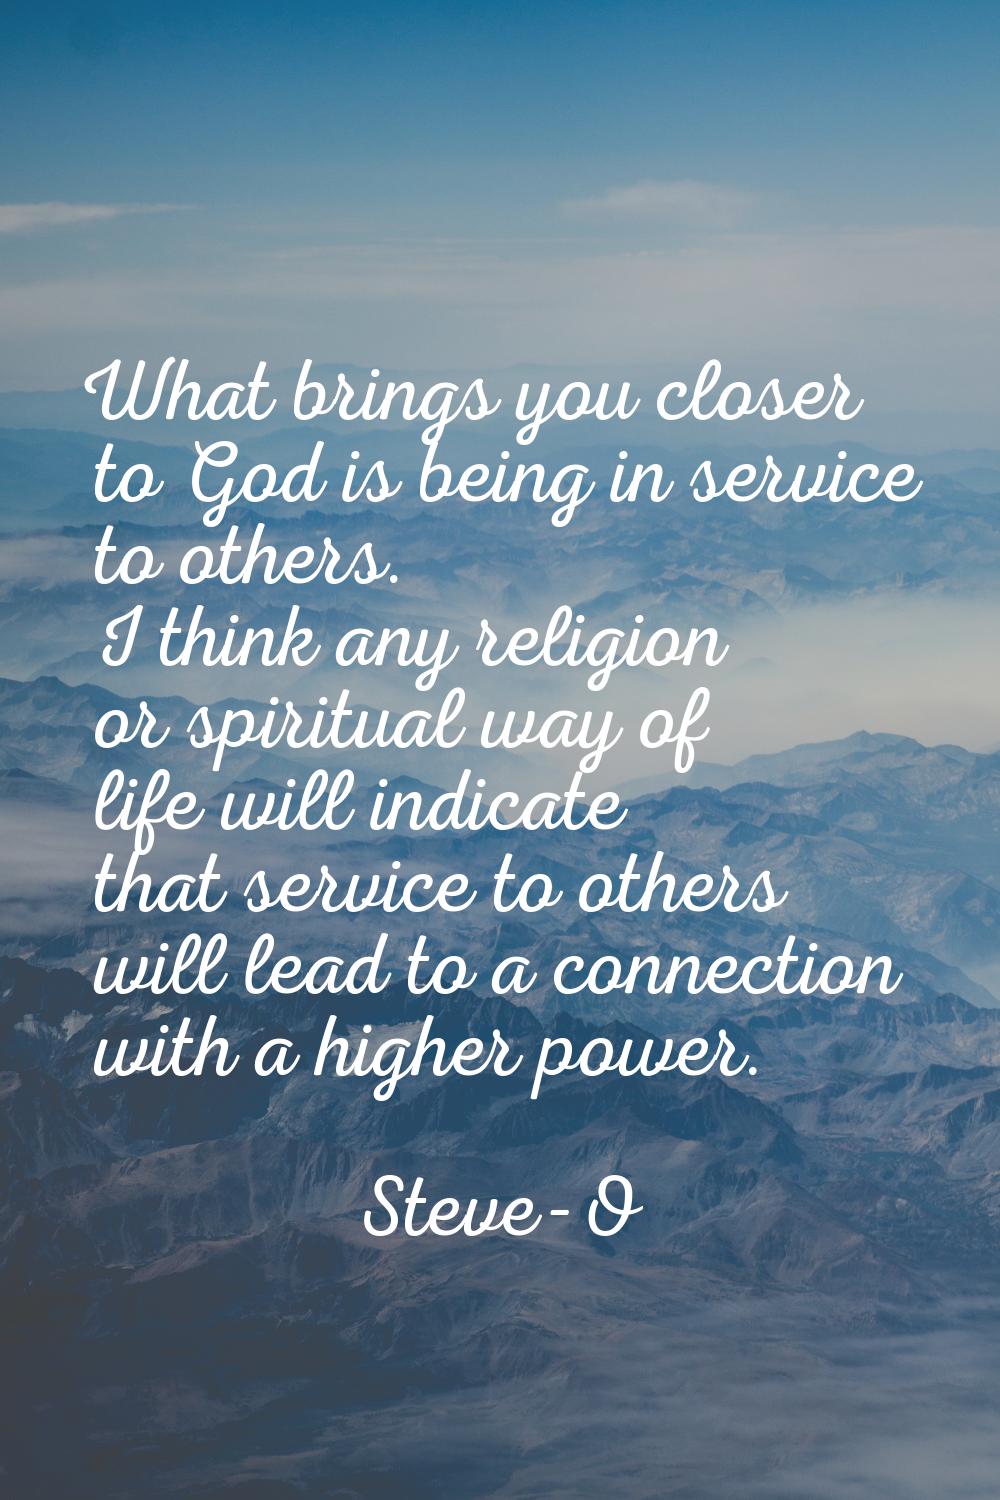 What brings you closer to God is being in service to others. I think any religion or spiritual way 